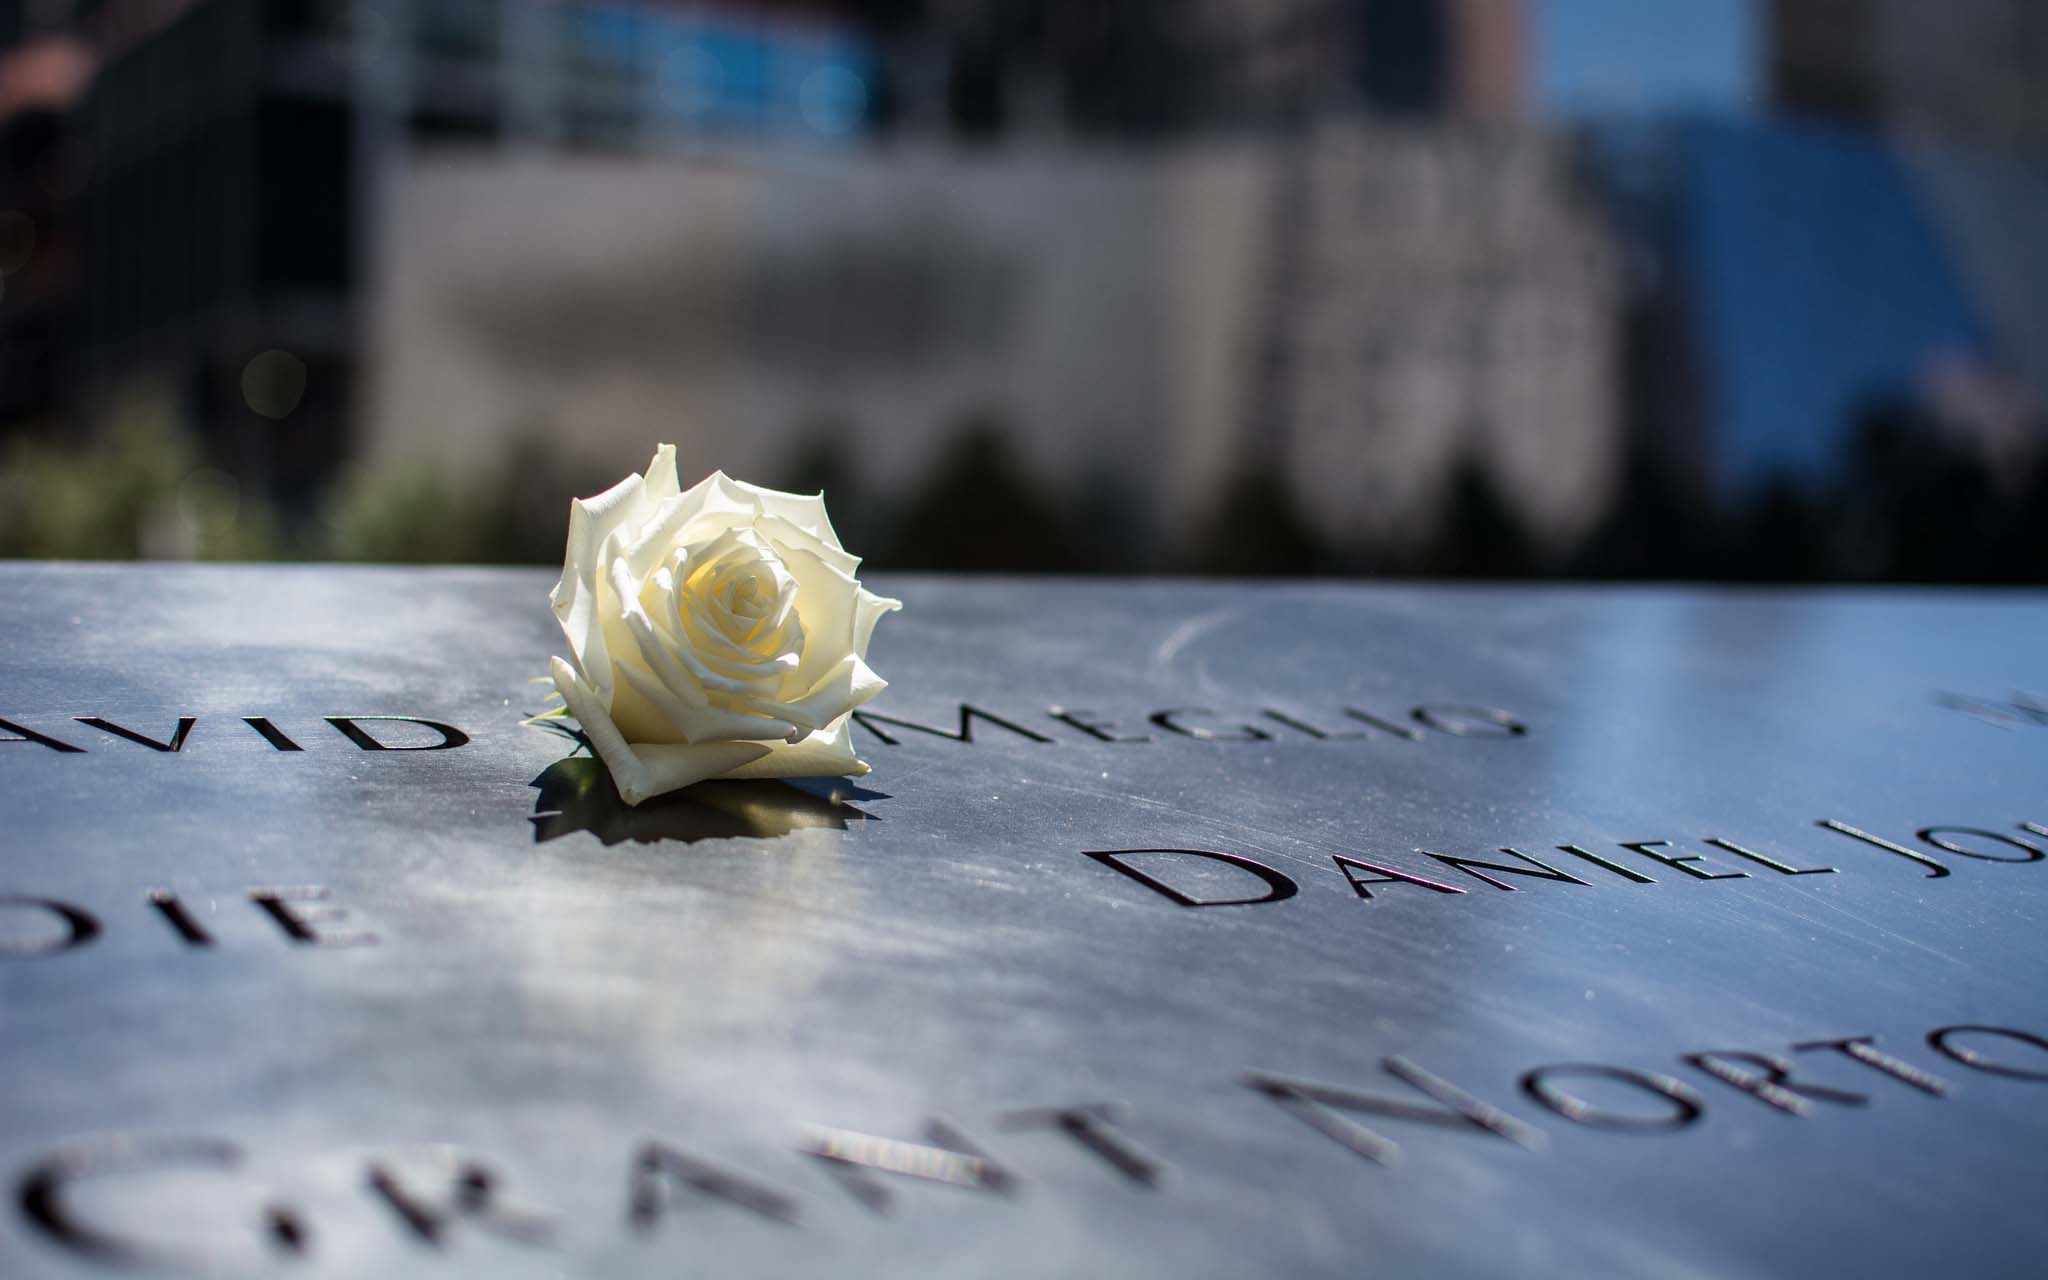 The National 9/11 Memorial and Museum, New York